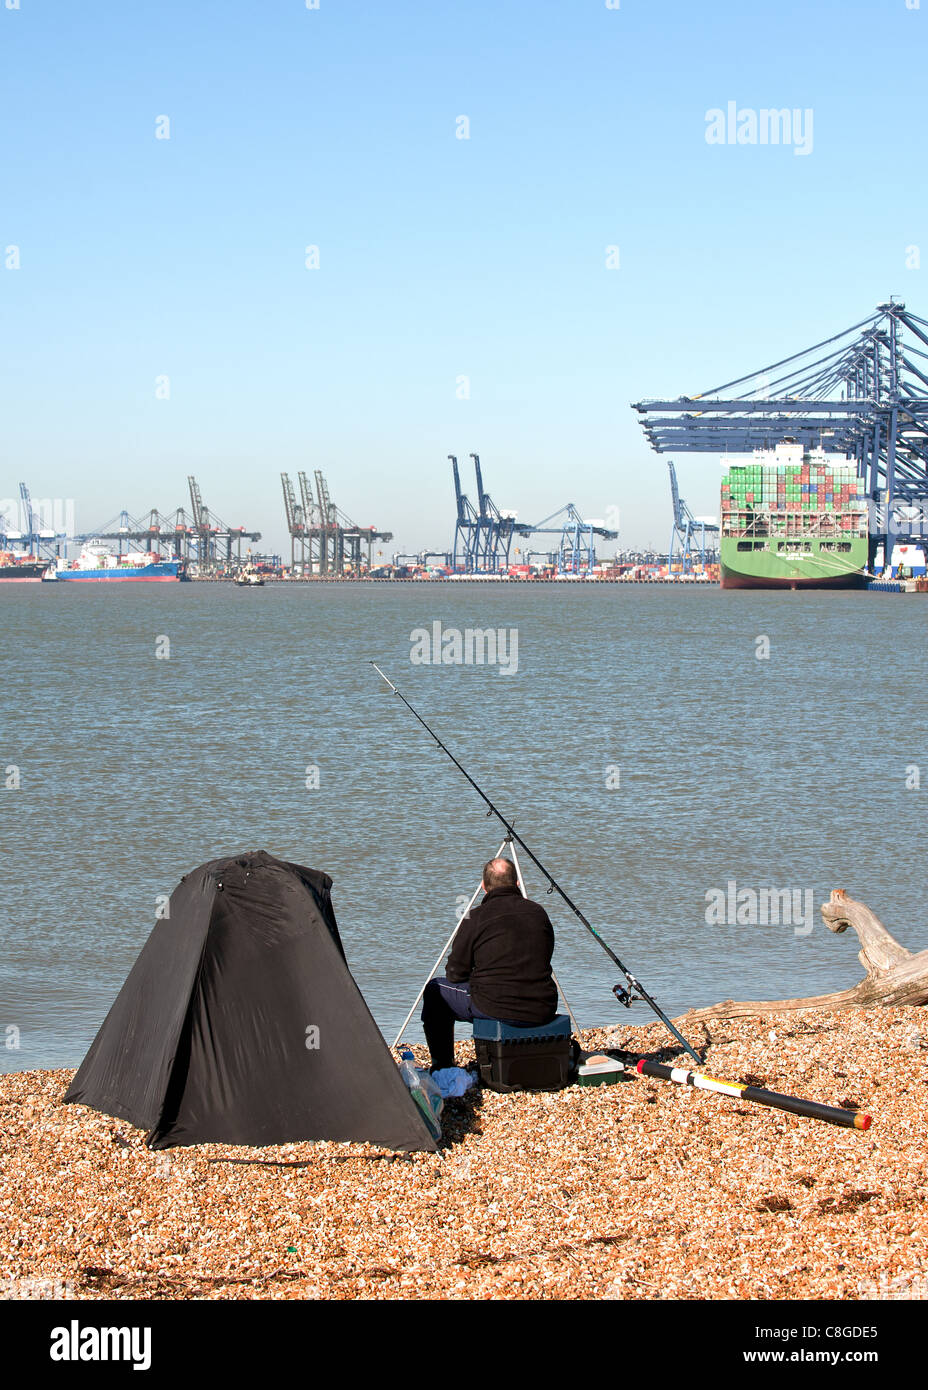 An angler fishing on the River Orwell Stock Photo